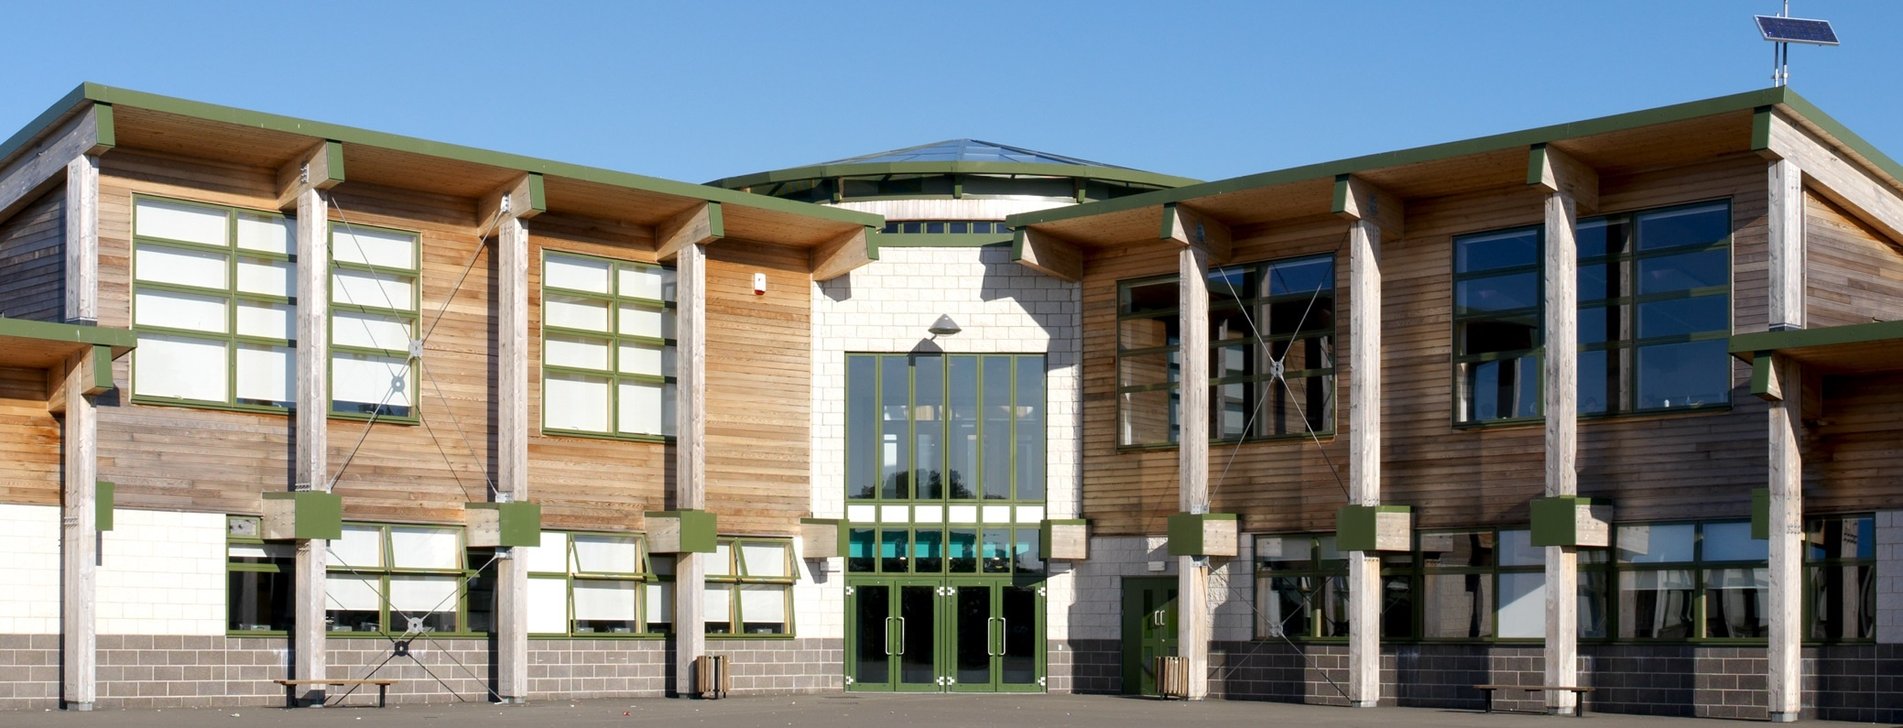 A school with a timber cladded design and windows in a green coloured frame